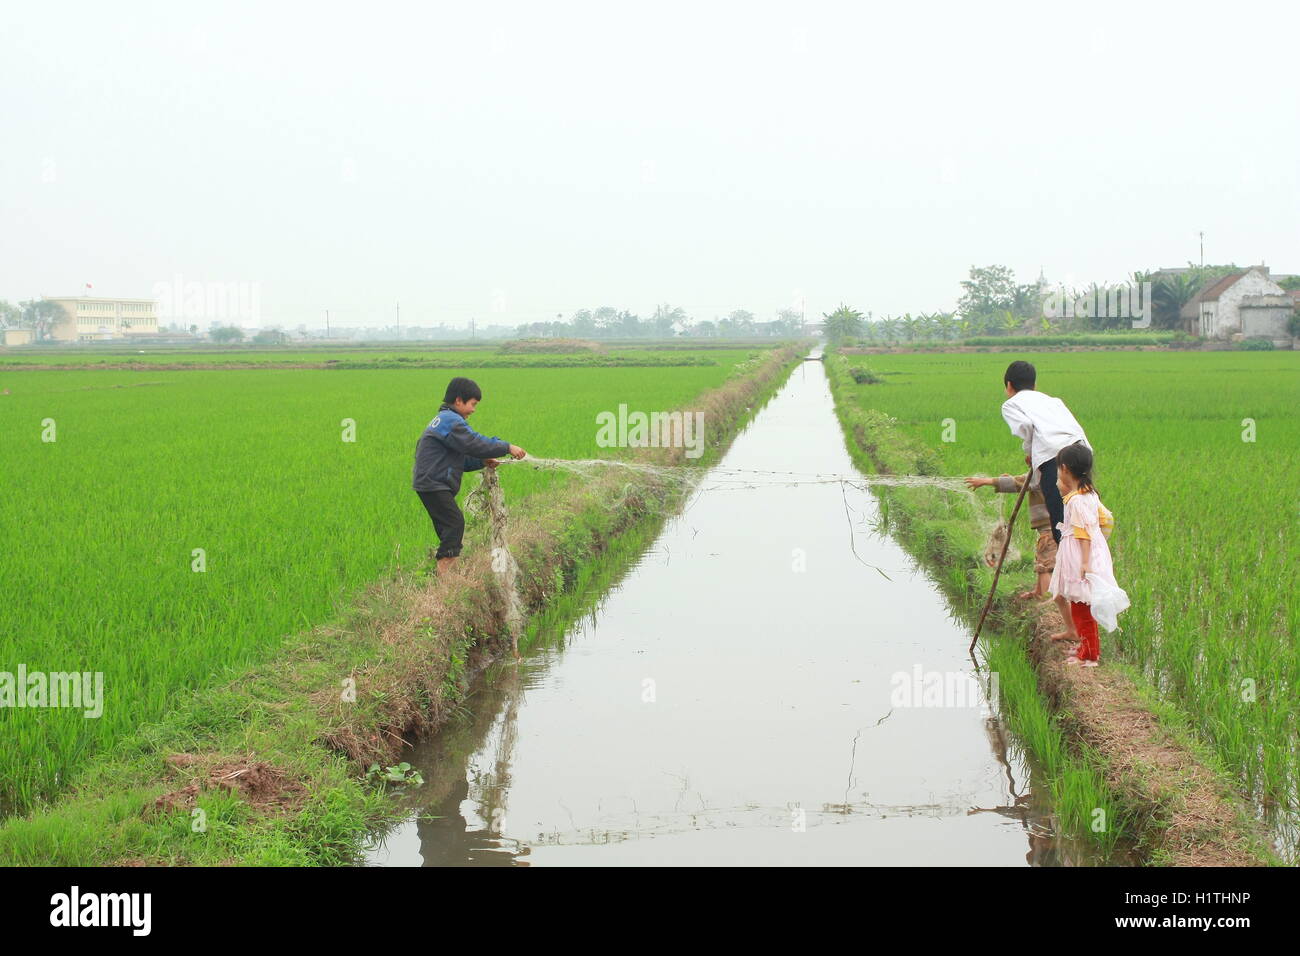 Nam Dinh, Vietnam - March 28, 2010: Children are playing in the paddy field in the countryside of the North of Vietnam Stock Photo